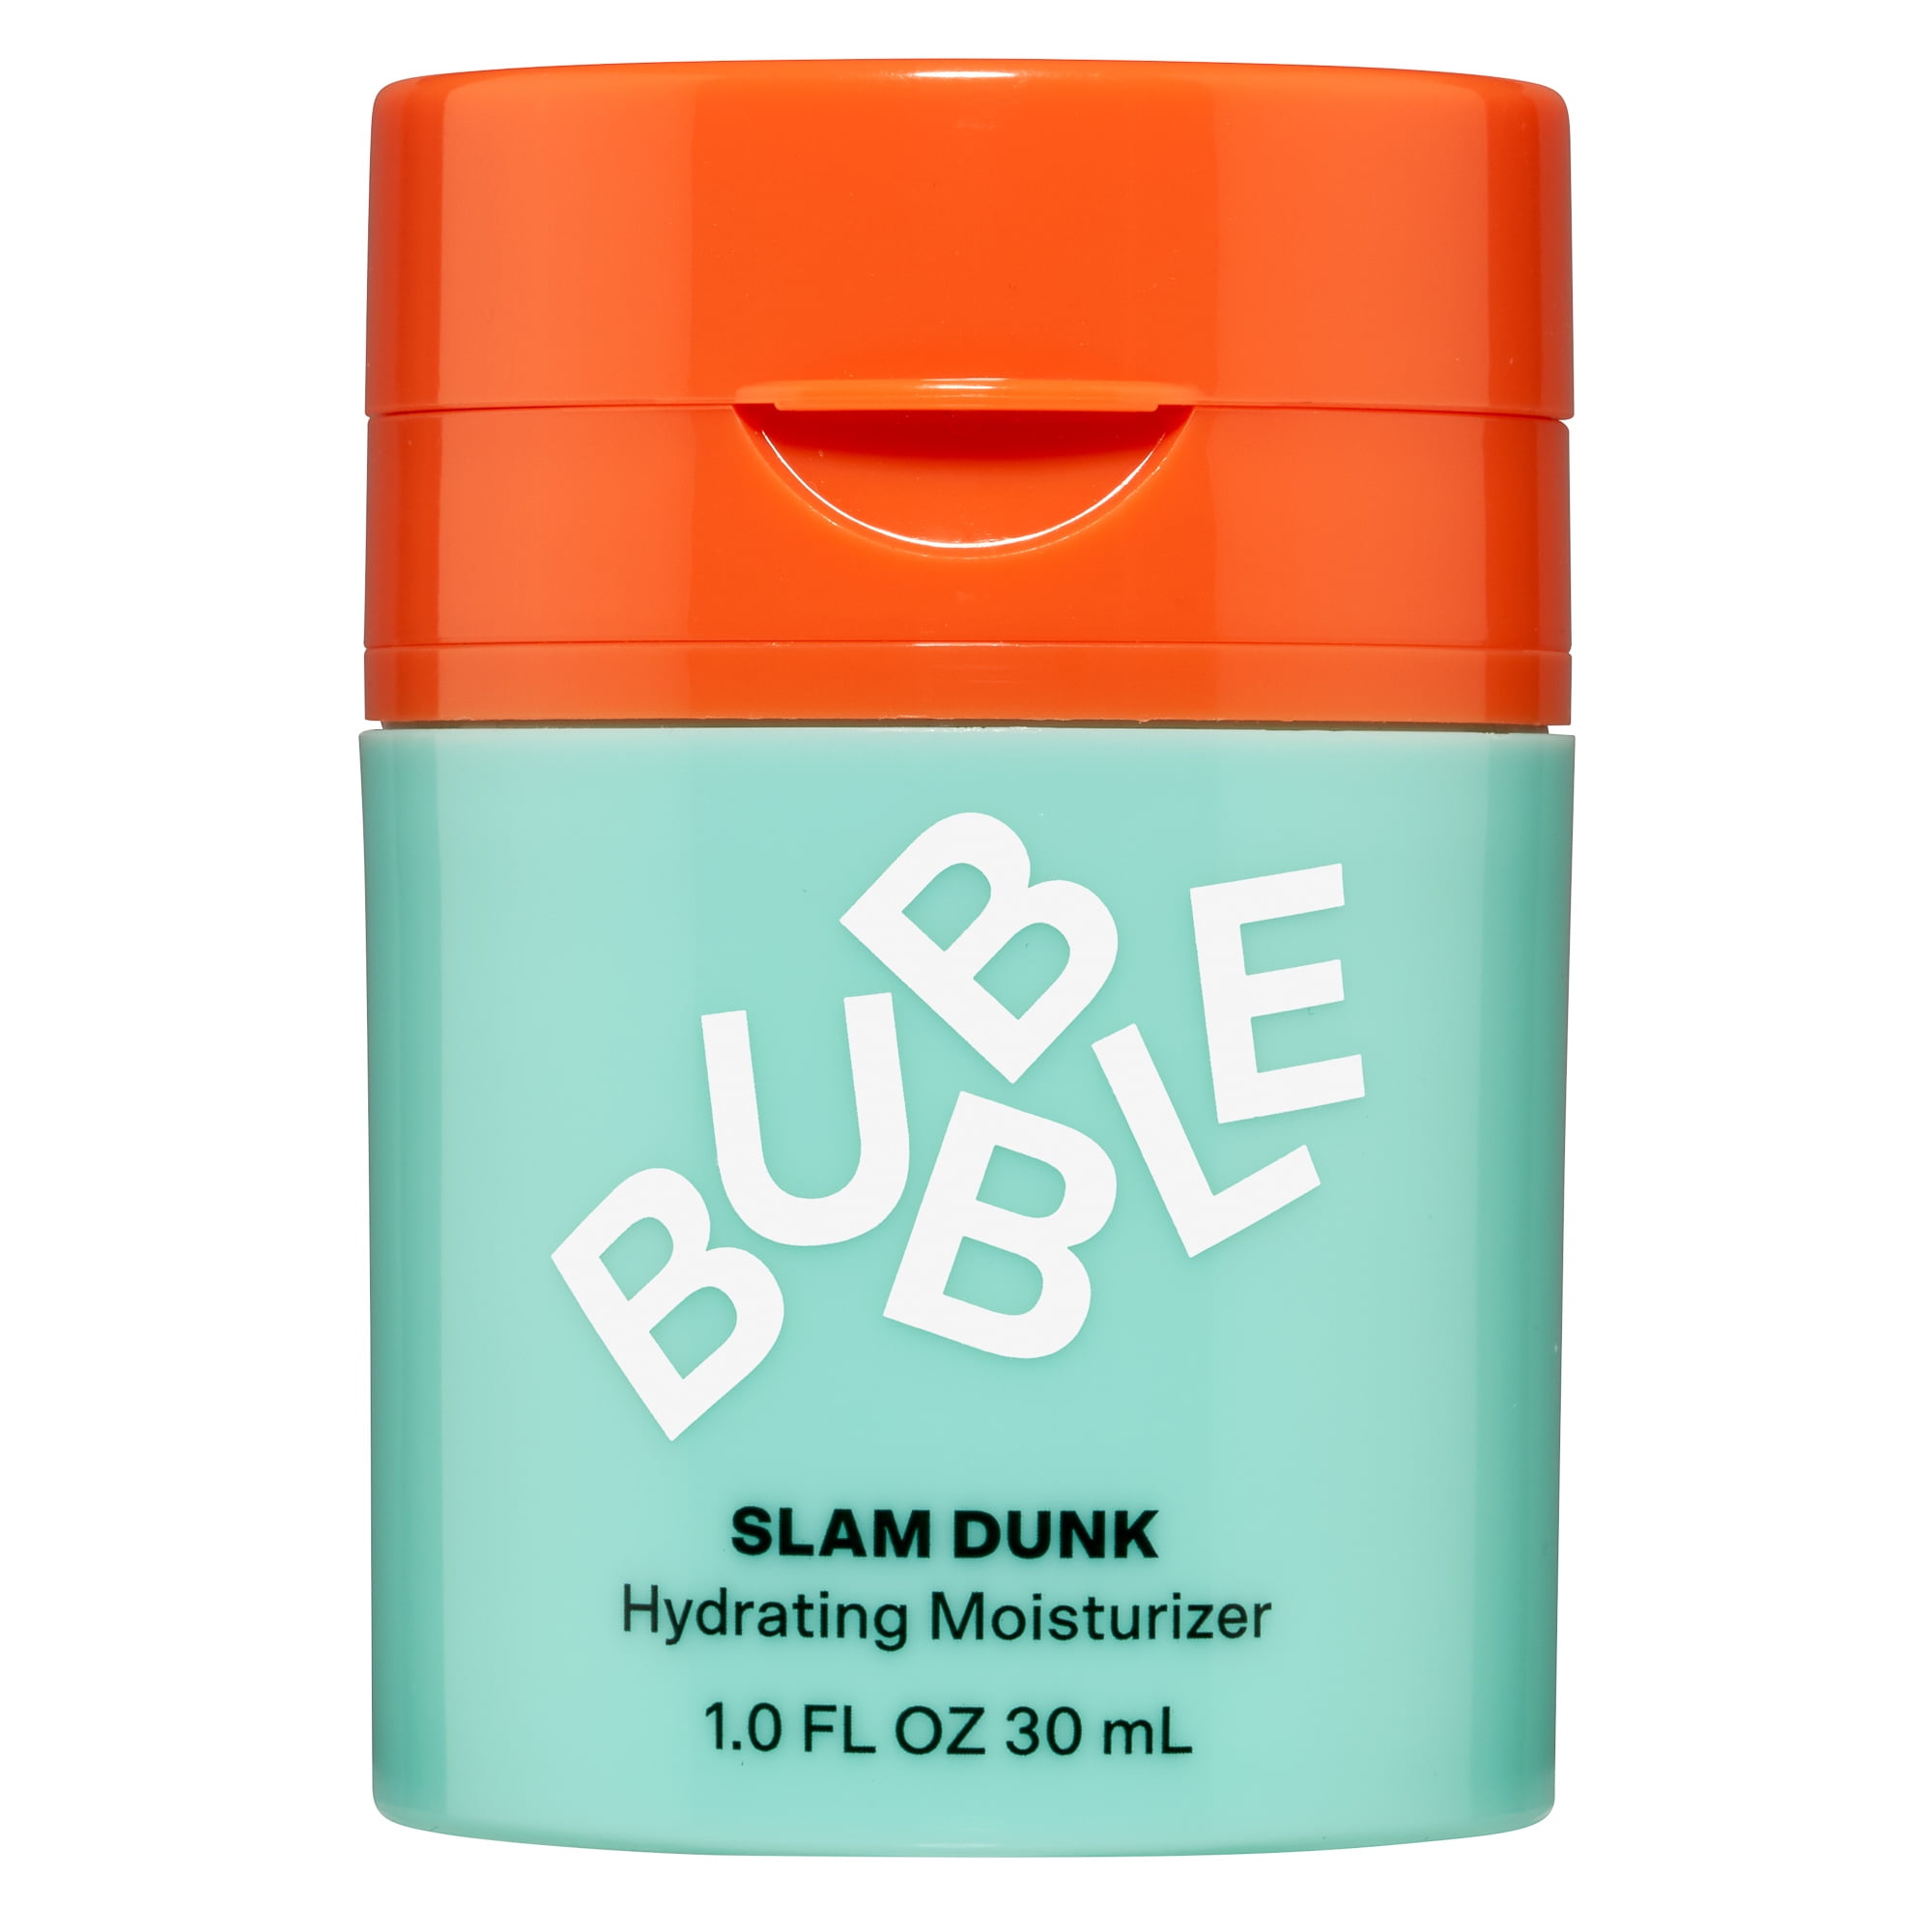 Bubble Skincare Slam Dunk Hydrating Face Moisturizer, For Normal to Dry Skin, 1.0 fl oz, Made with Aloe Leaf Juice, Vitamin E, and Avocado Oil